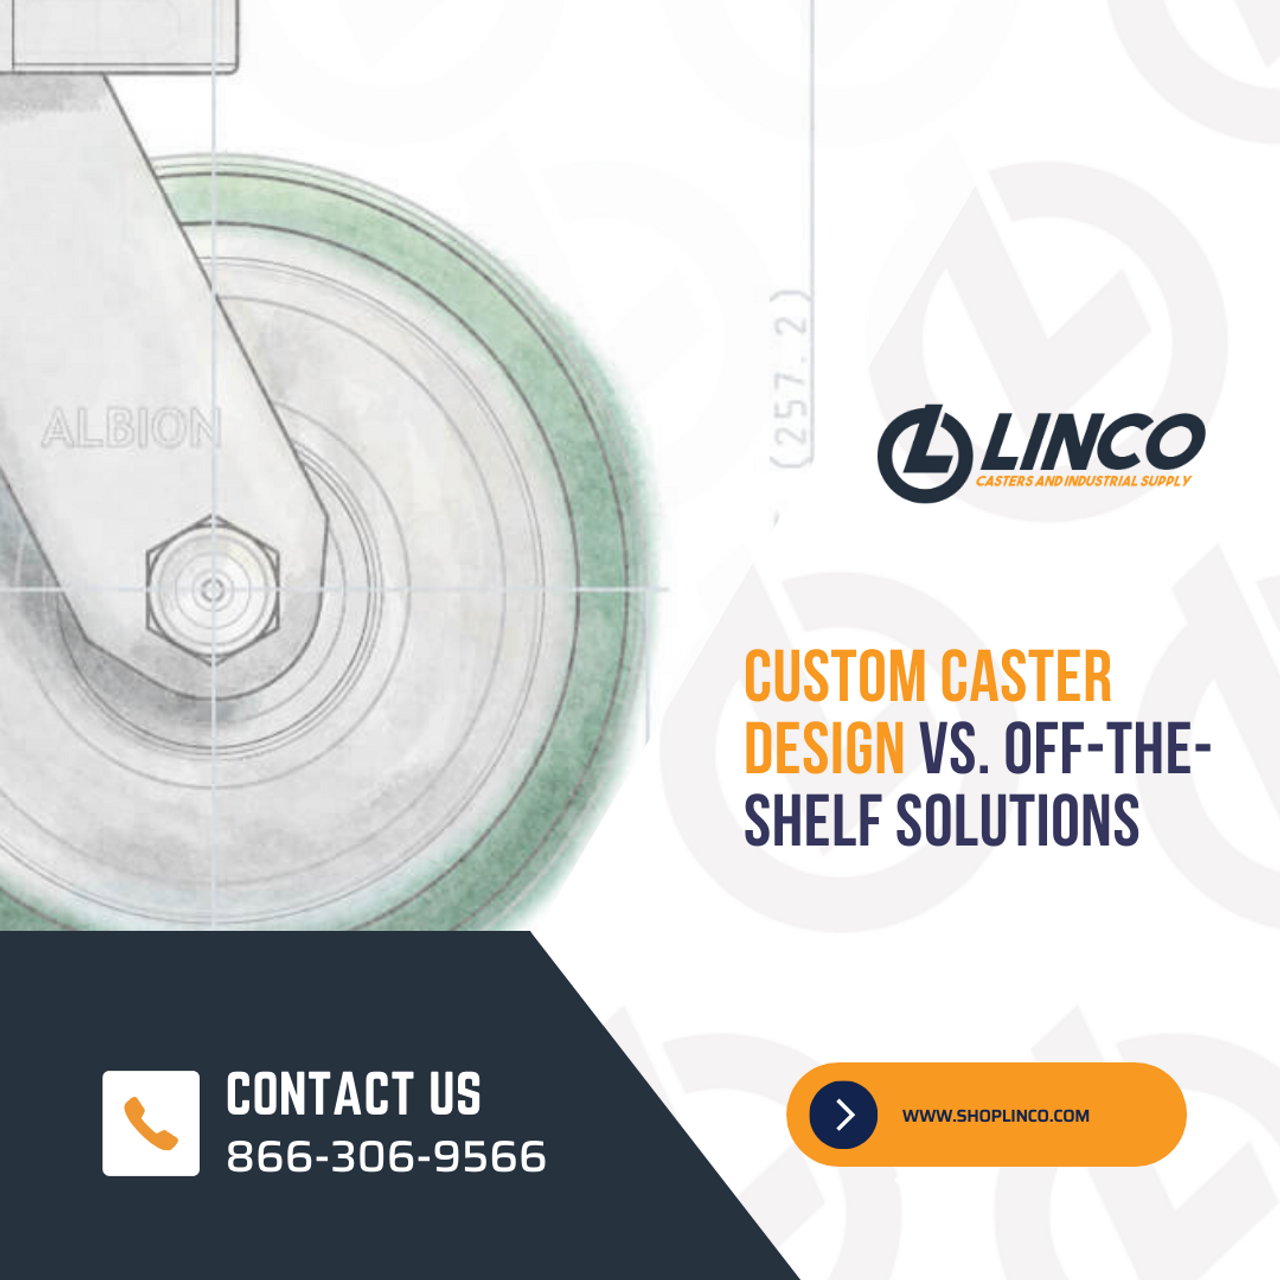 Custom Caster Design vs. Off-the-Shelf Solutions: Which Is Right for You?